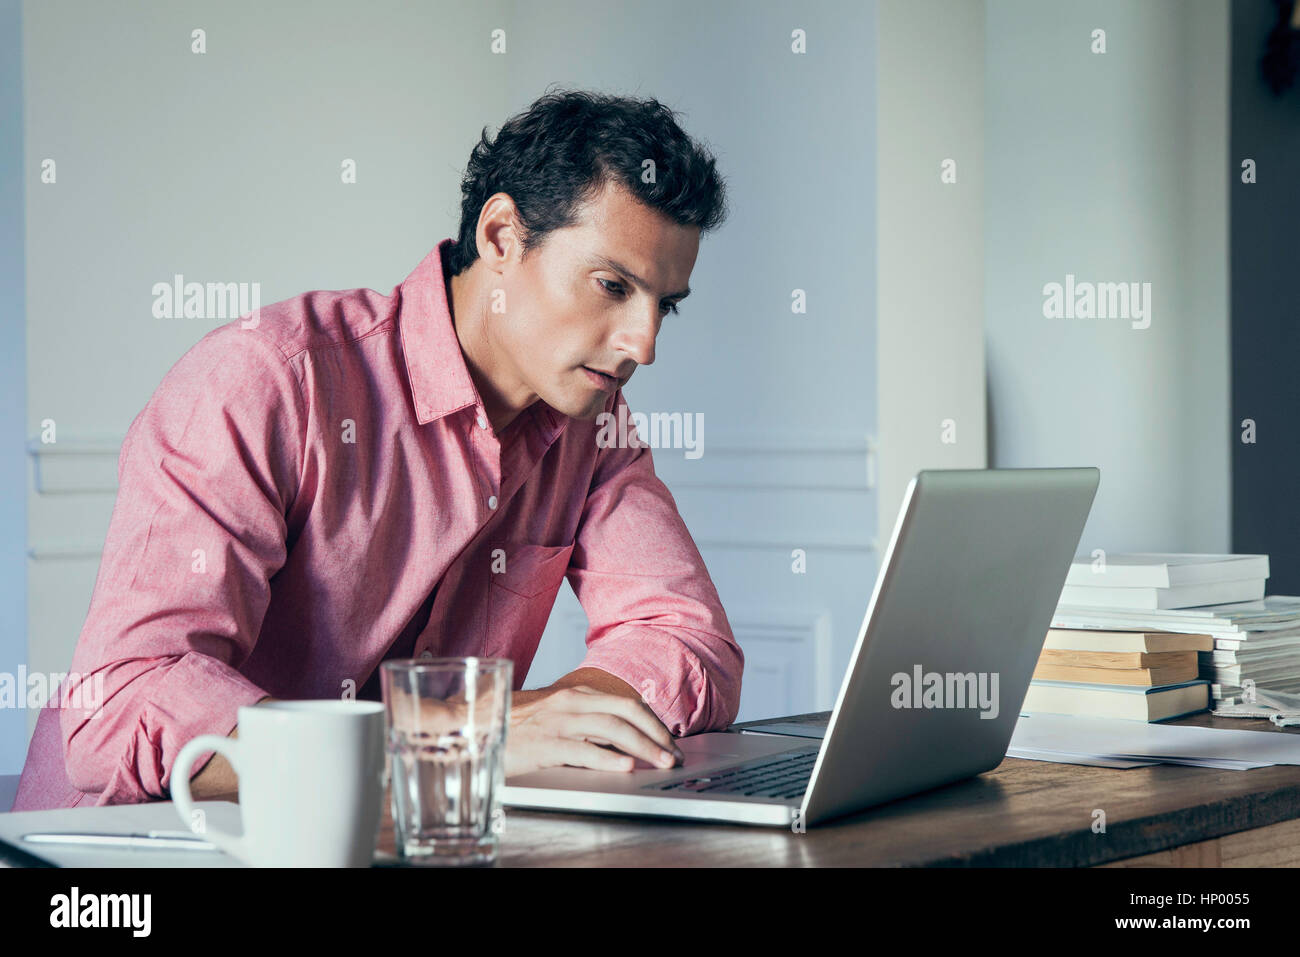 Man working on laptop computer at home Stock Photo